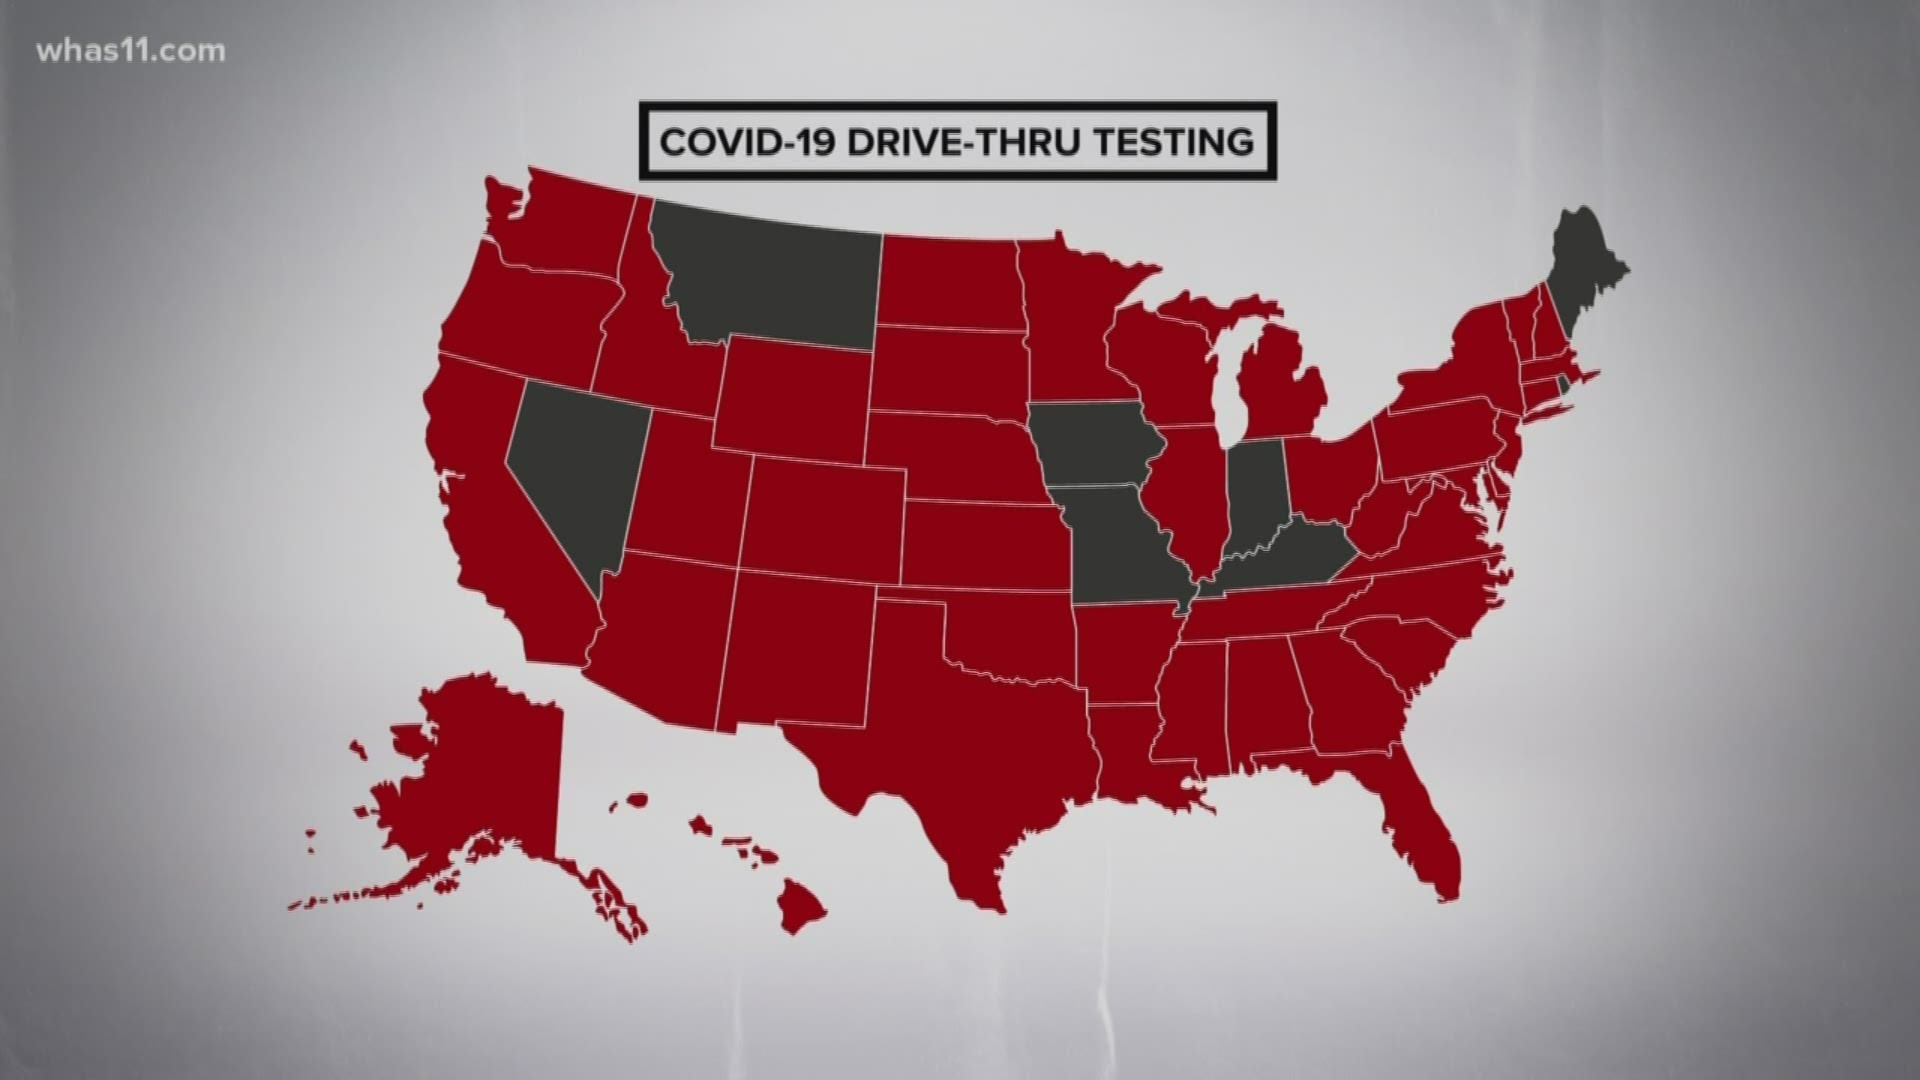 For many states testing has also increased including drive-thru locations able to accommodate hundreds of people every day. In Kentucky no such testing exist